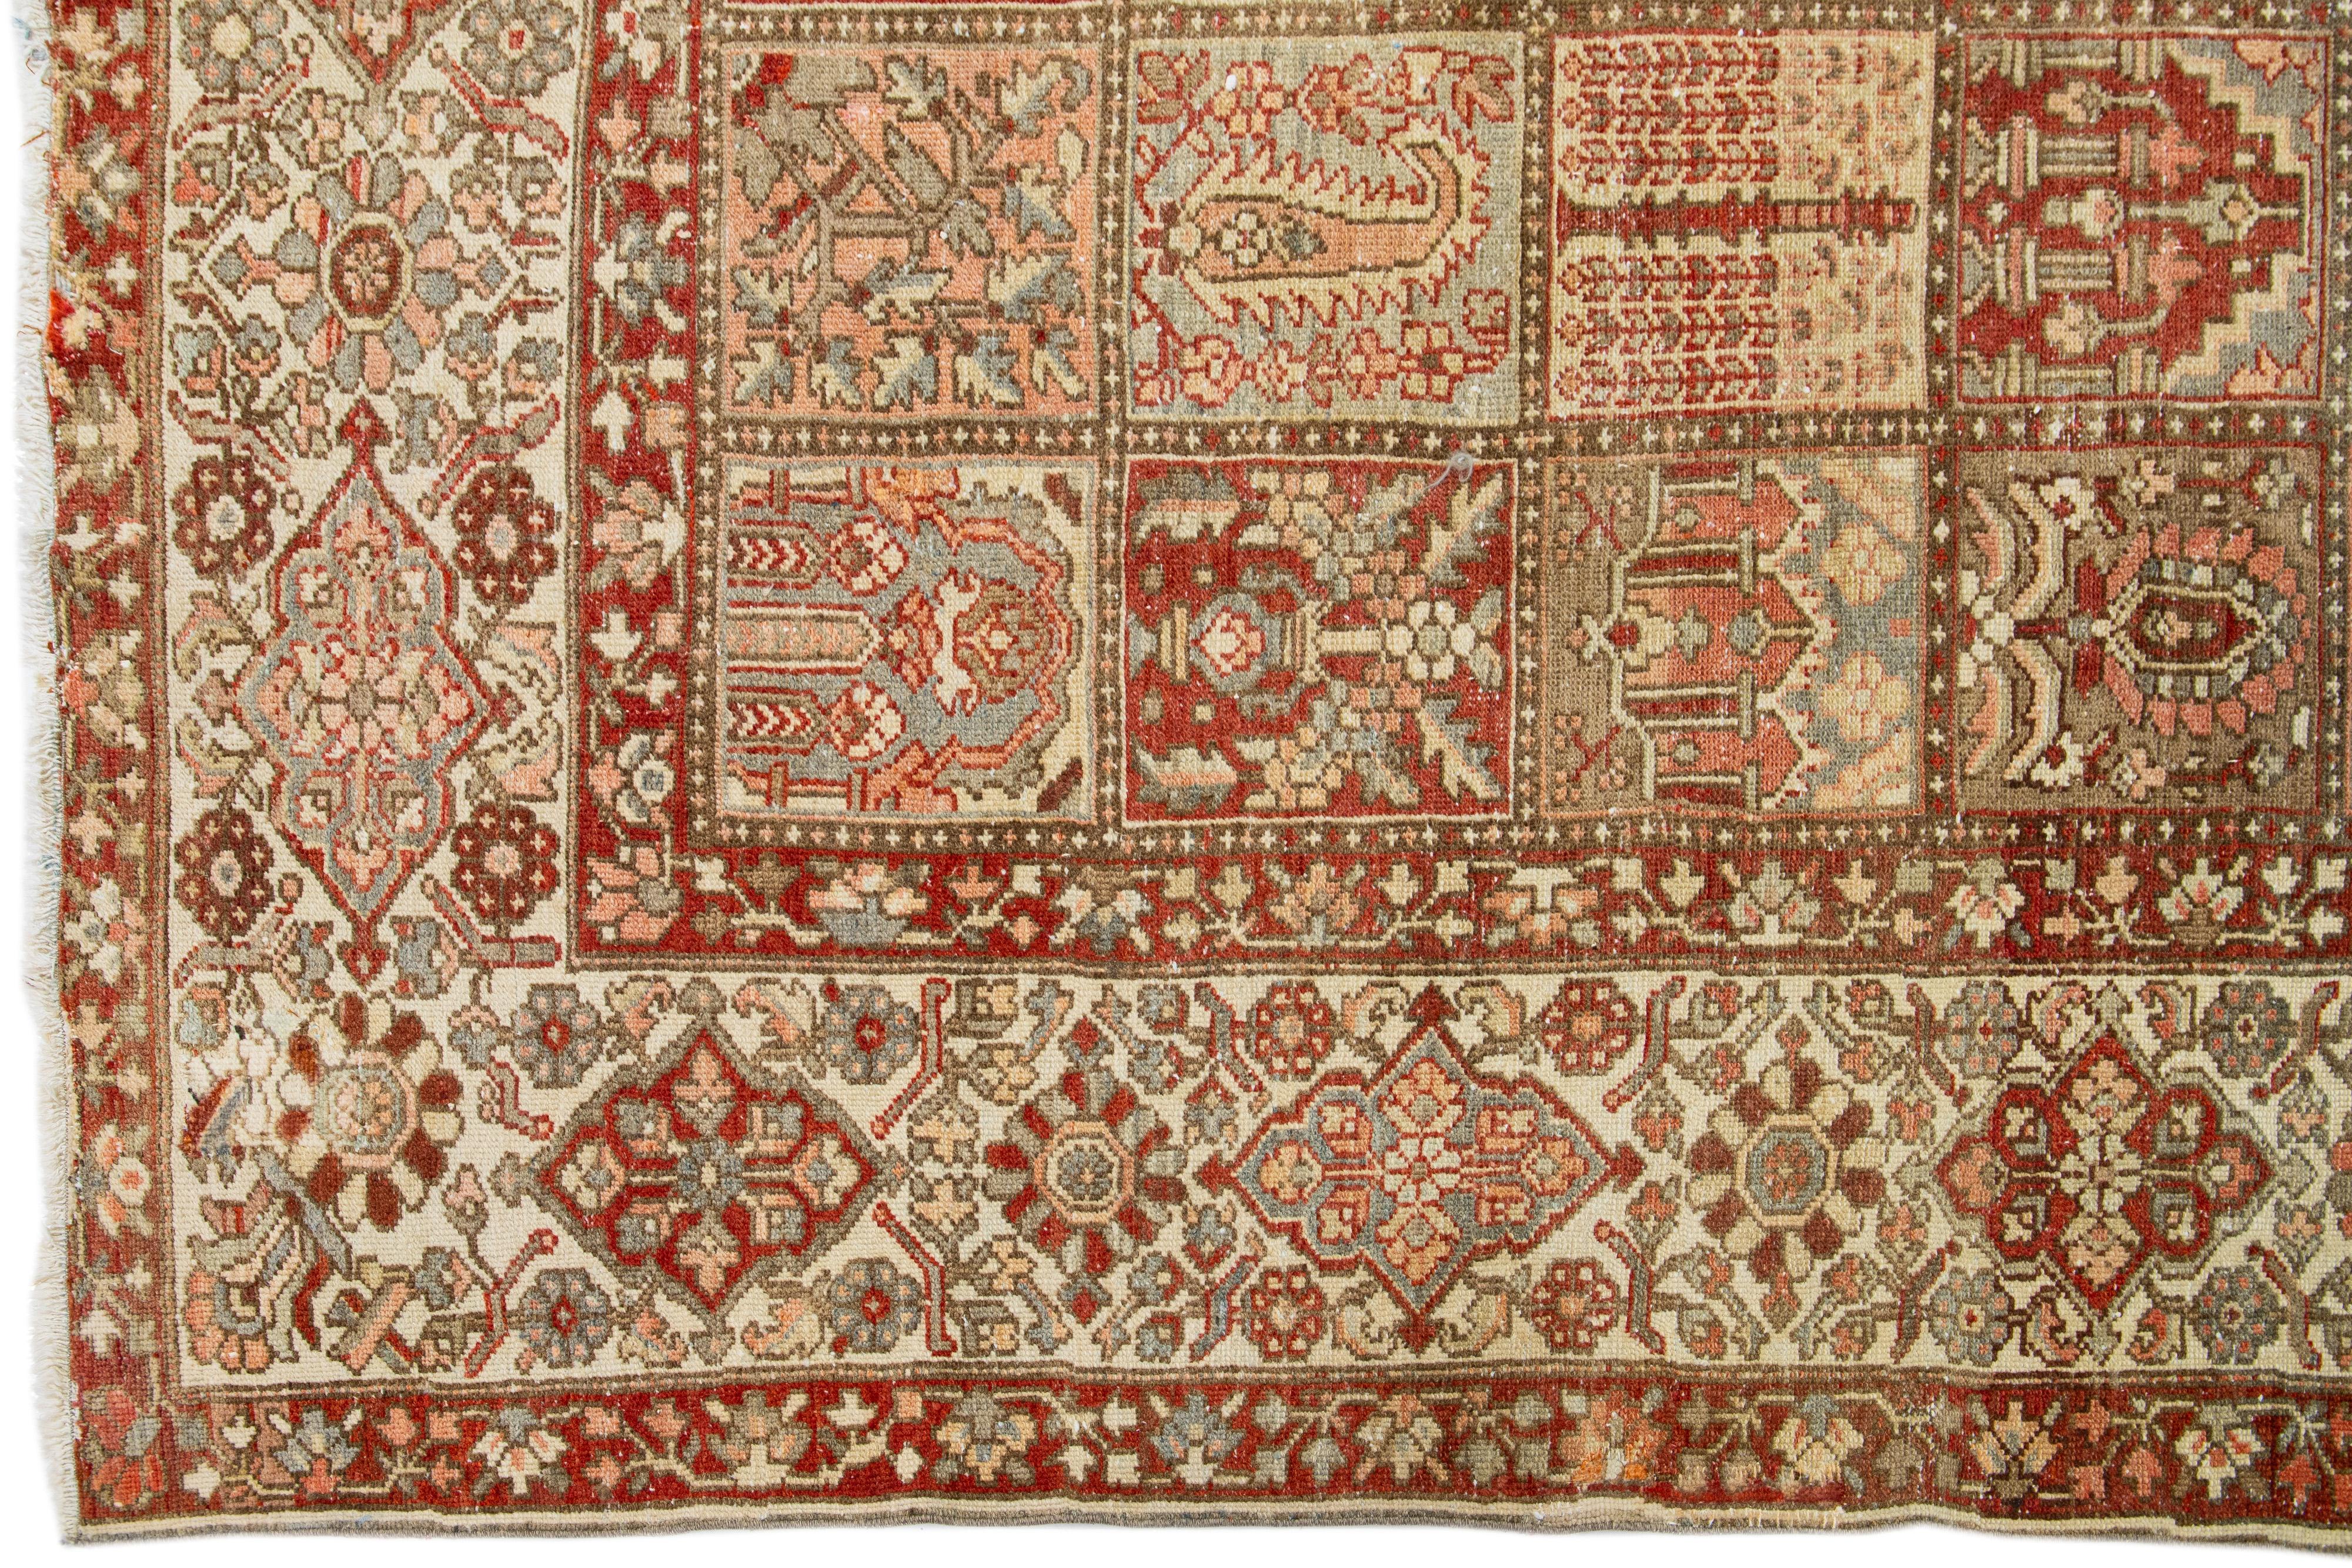 20th Century Multicolor Persian Bakhtiari Wool Rug Handcrafted in the 1920s For Sale